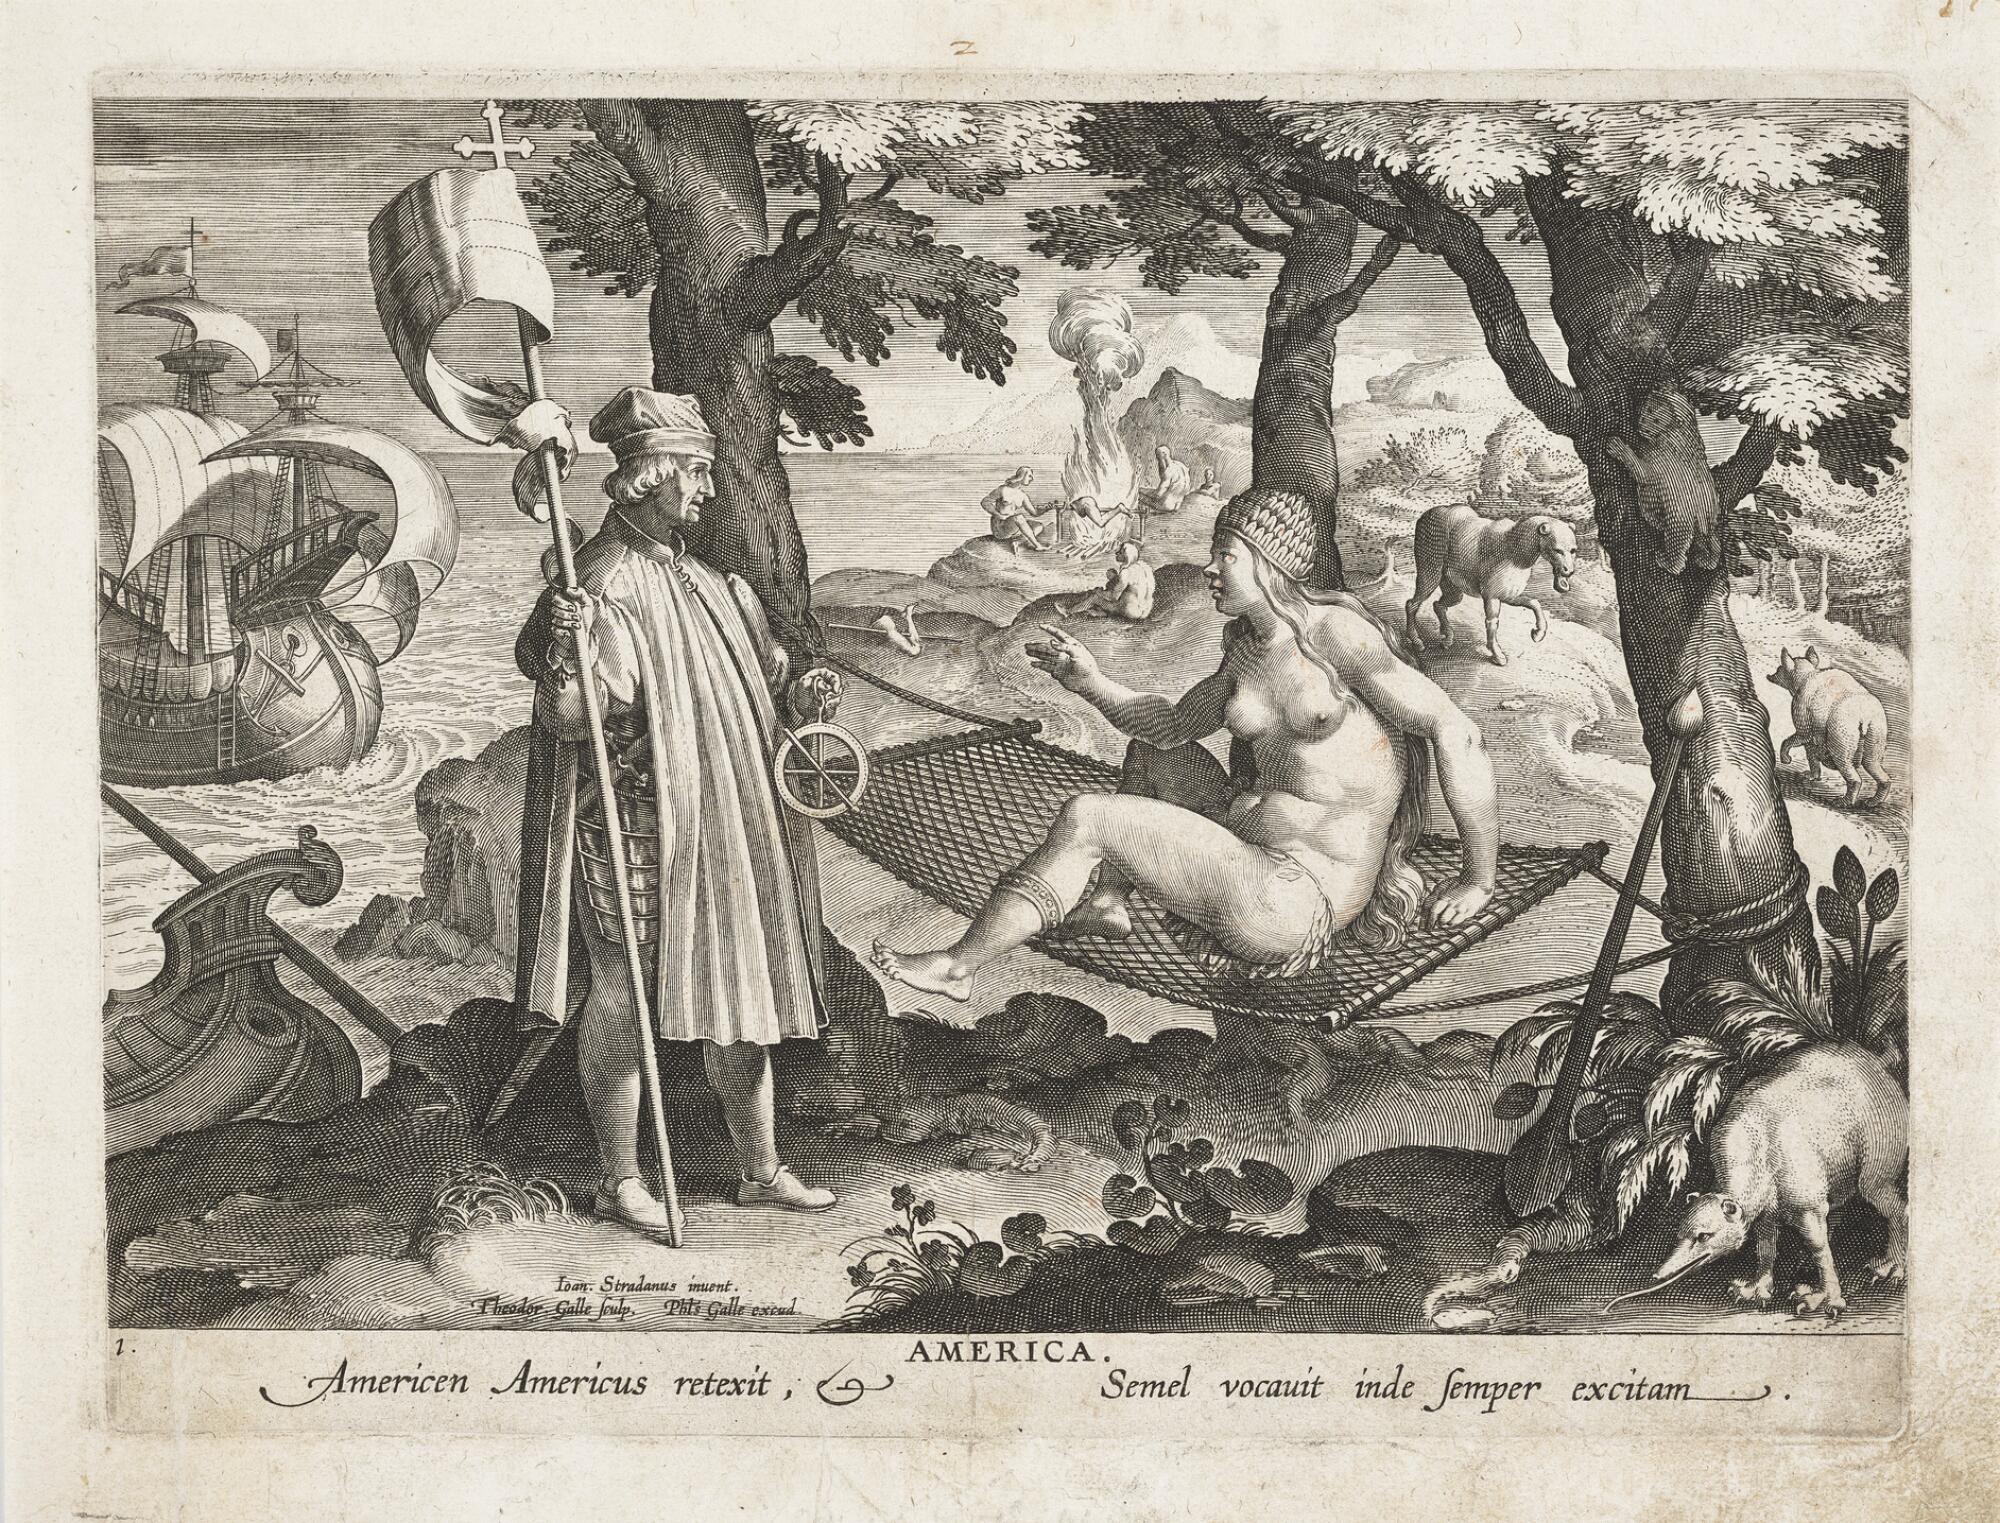 A 16th c. engraving shows an explorer standing over a nude Indigenous woman. In the distance, people roast body parts